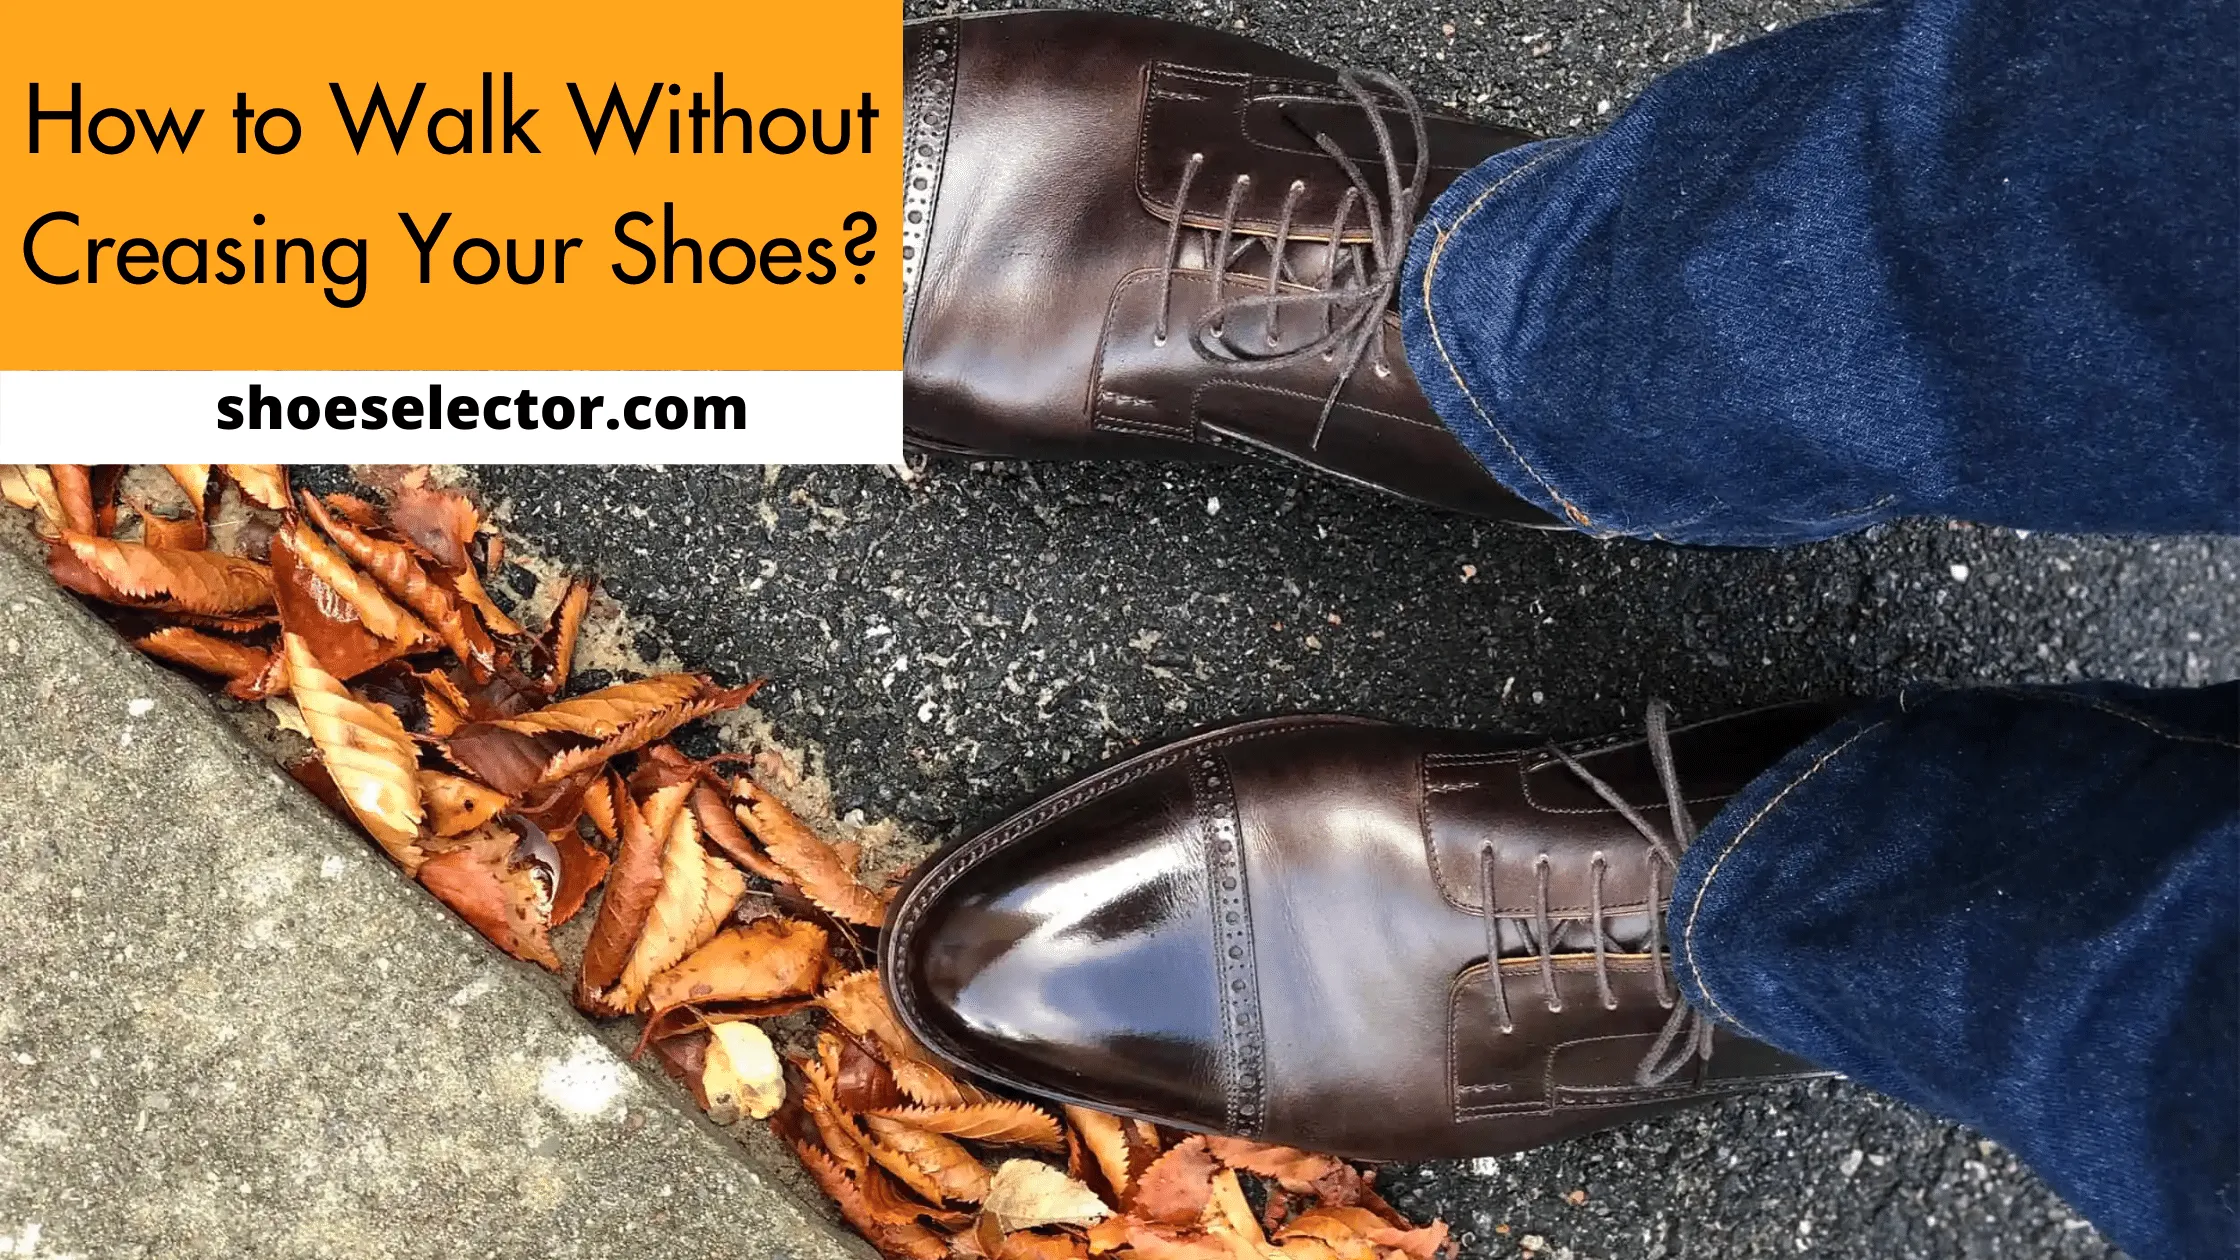 How to Walk Without Creasing Your Shoes? - Latest Guide